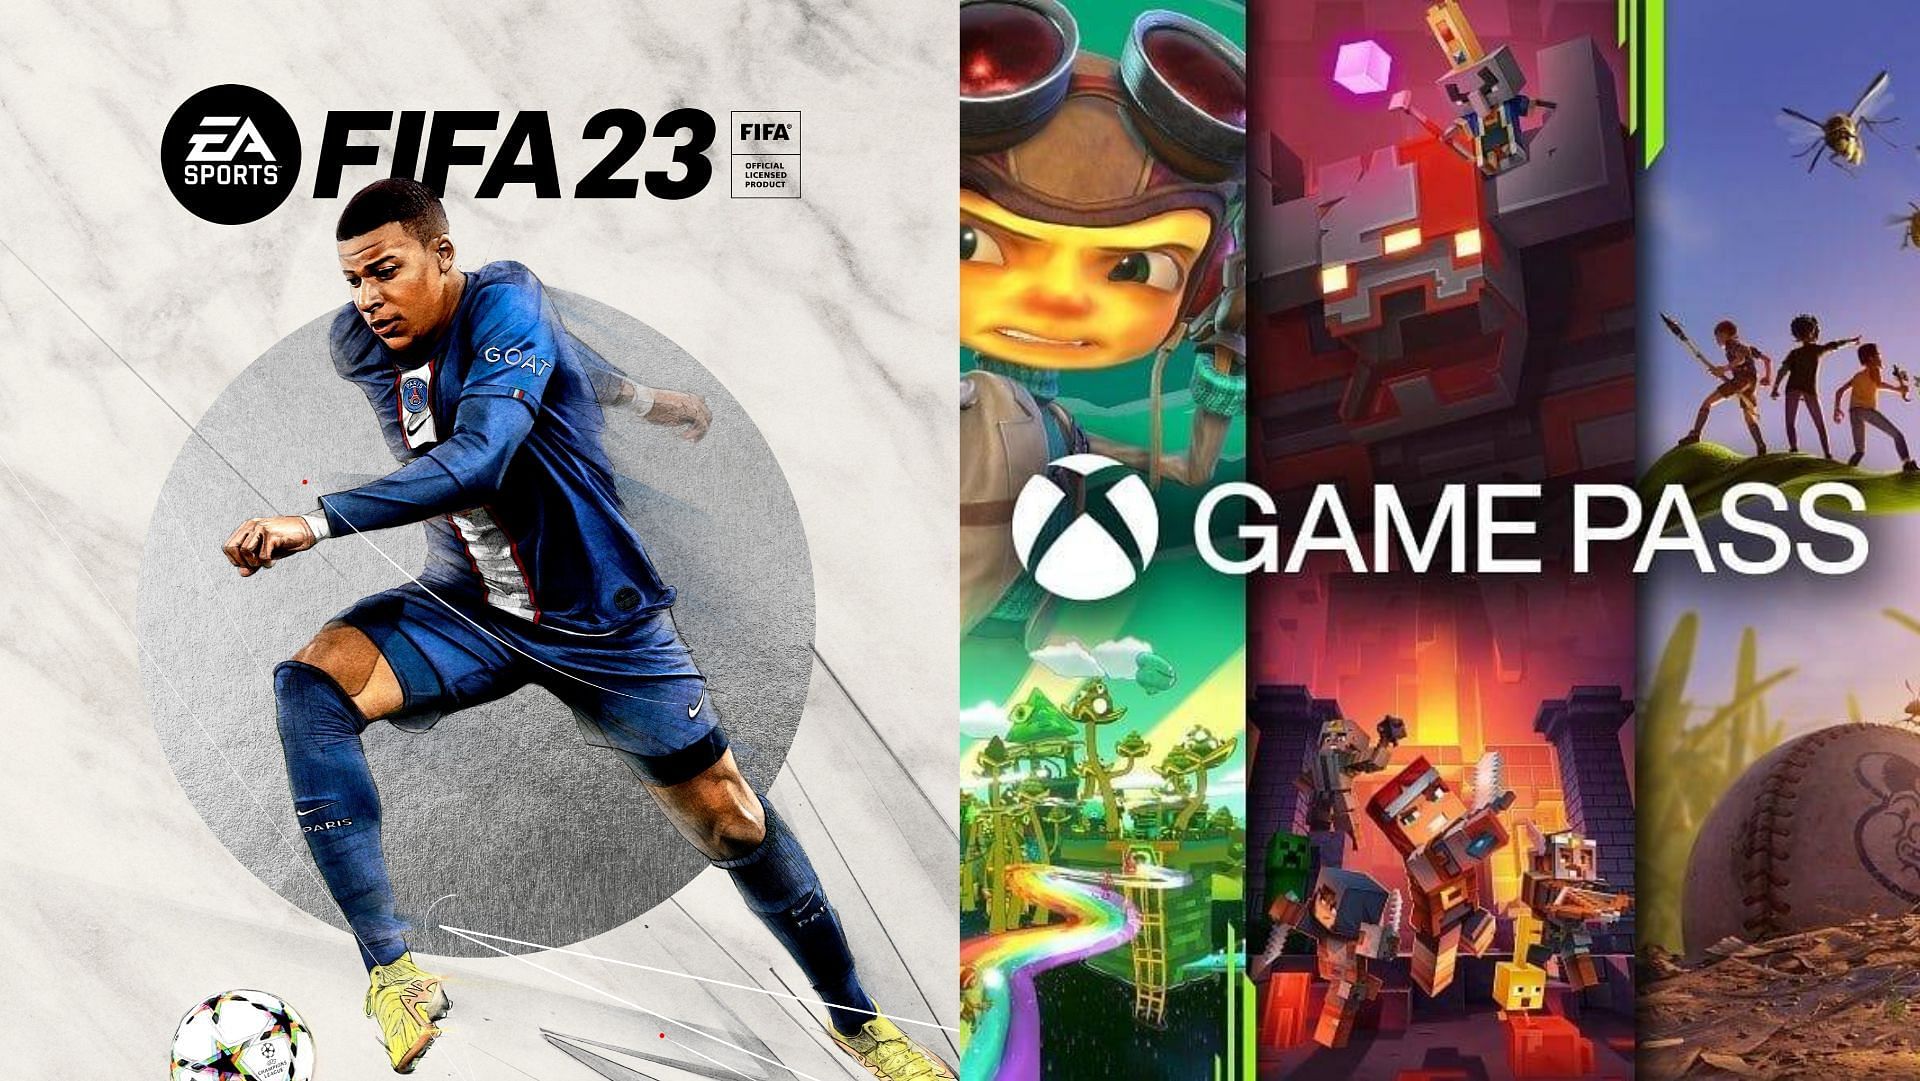 Is FIFA 23 on Game Pass?